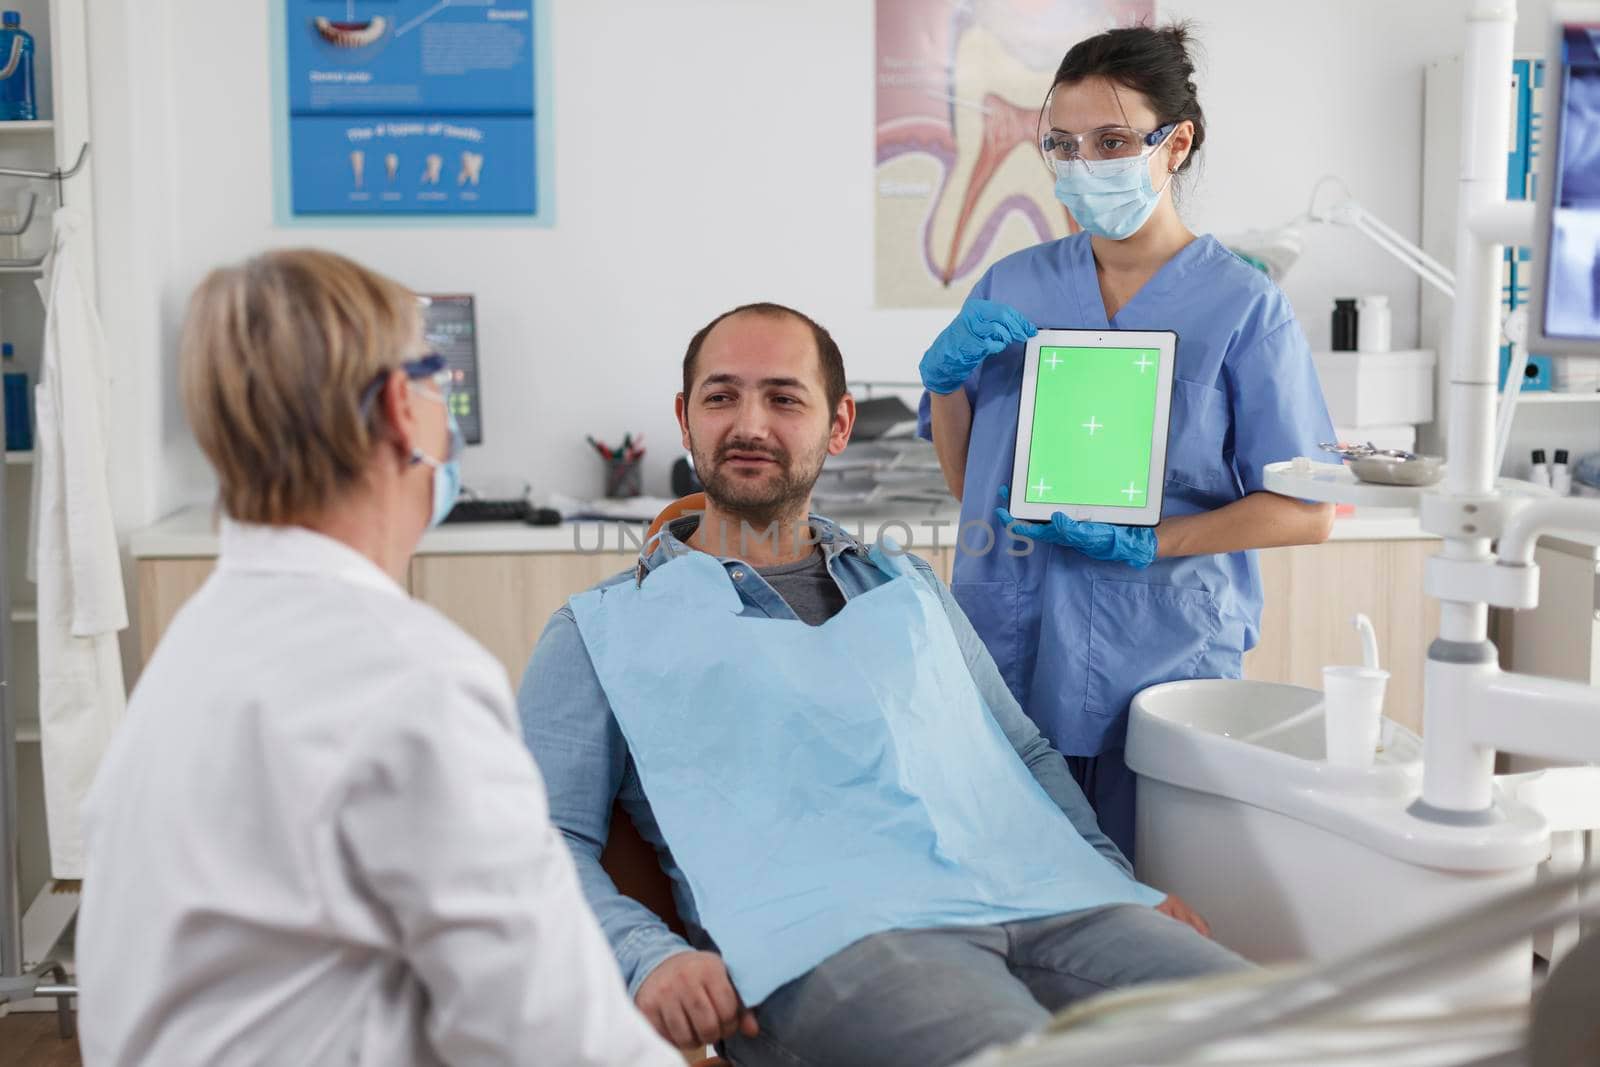 Stomatology medical team discussing dentistry treatment with patient during stomatological consultation in dental office. Nurse holding mock up green screen chroma key tablet with isolated display